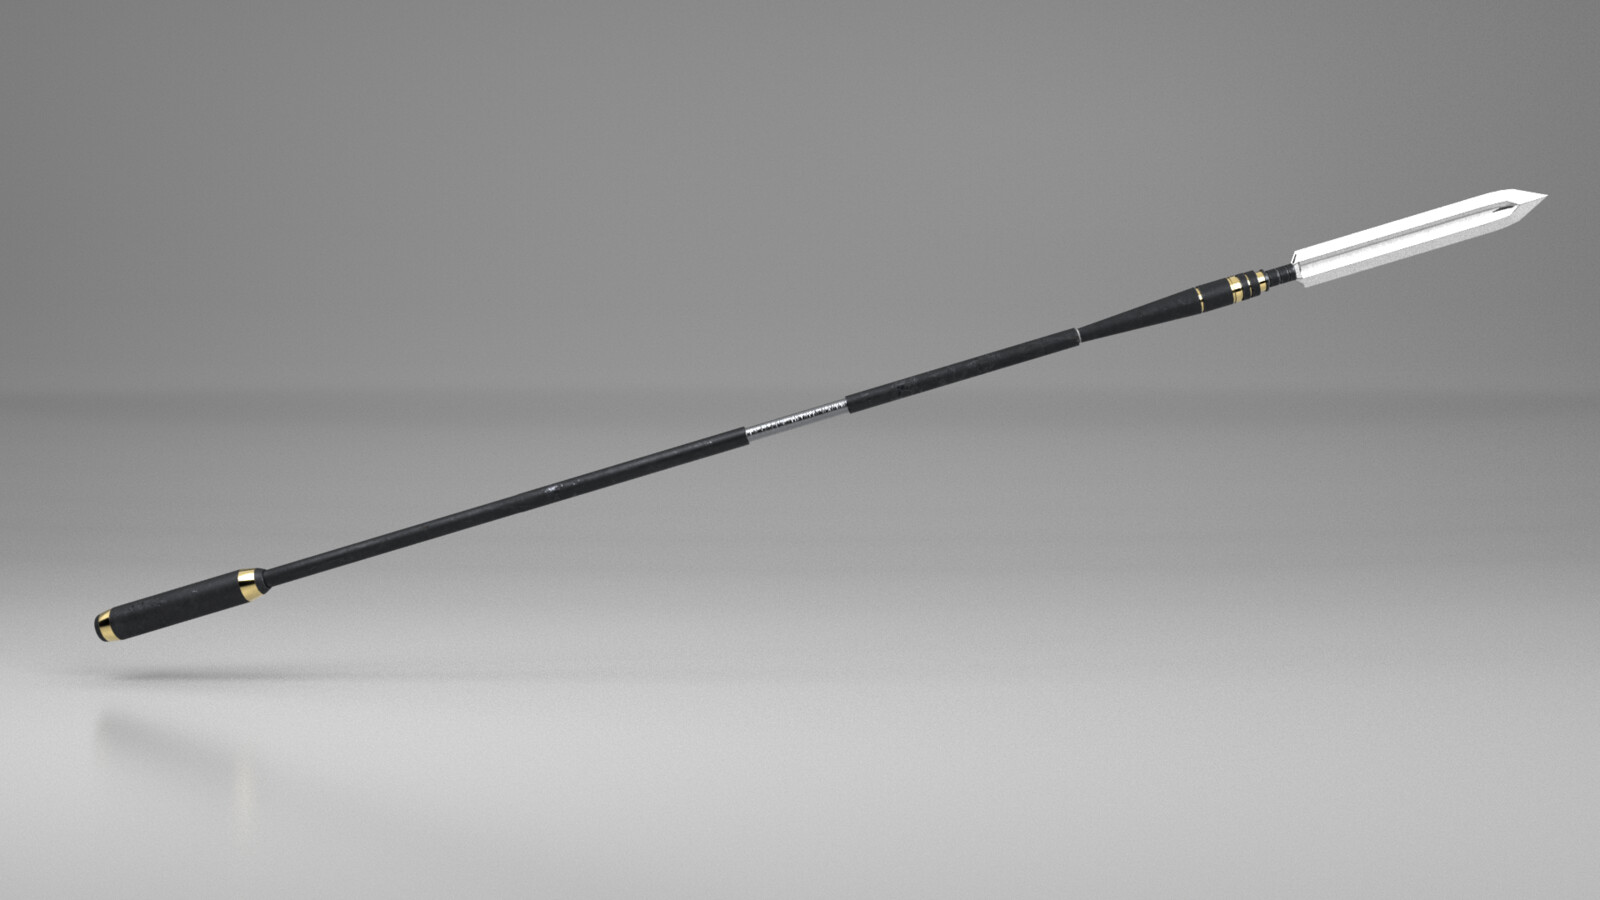 3D-modeled spear. Made with Maya, Substance Painter, and Photoshop.